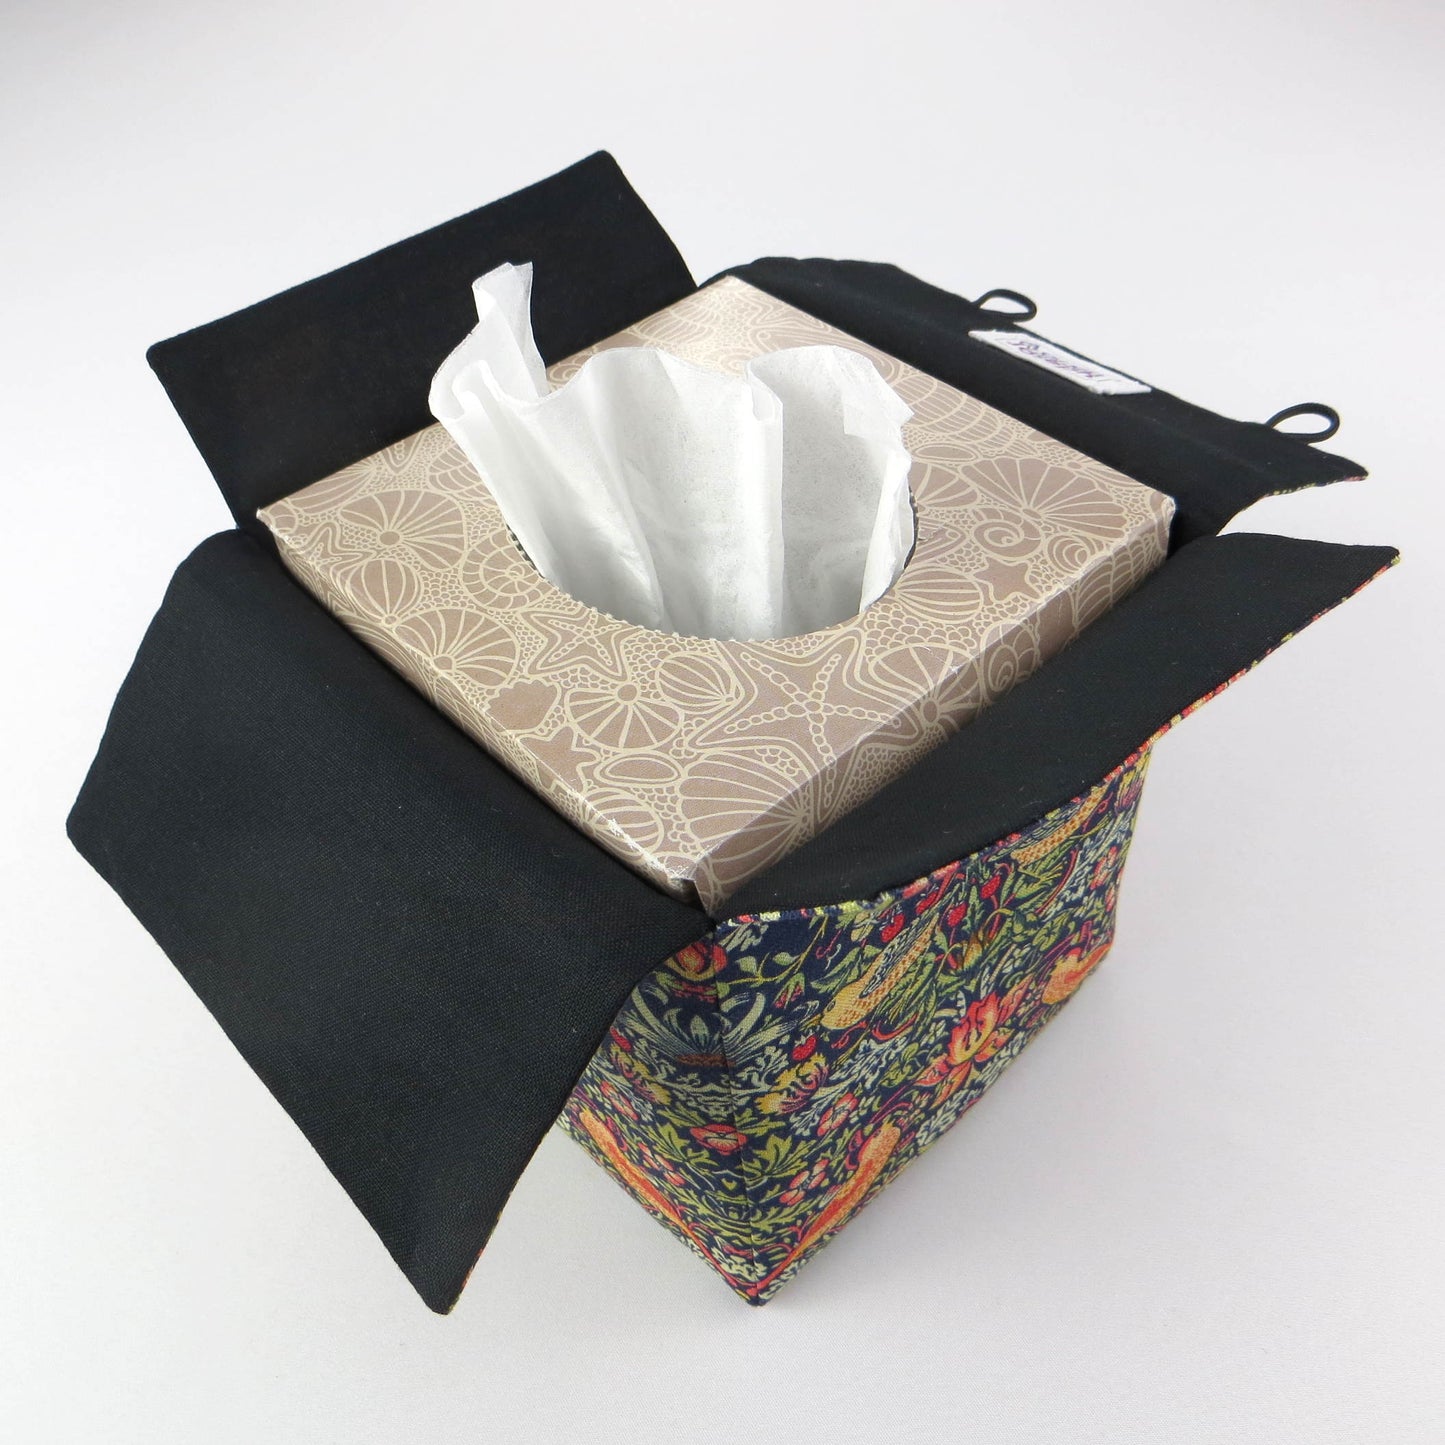 Square tissue box cover with birds and berries design on dark blue background